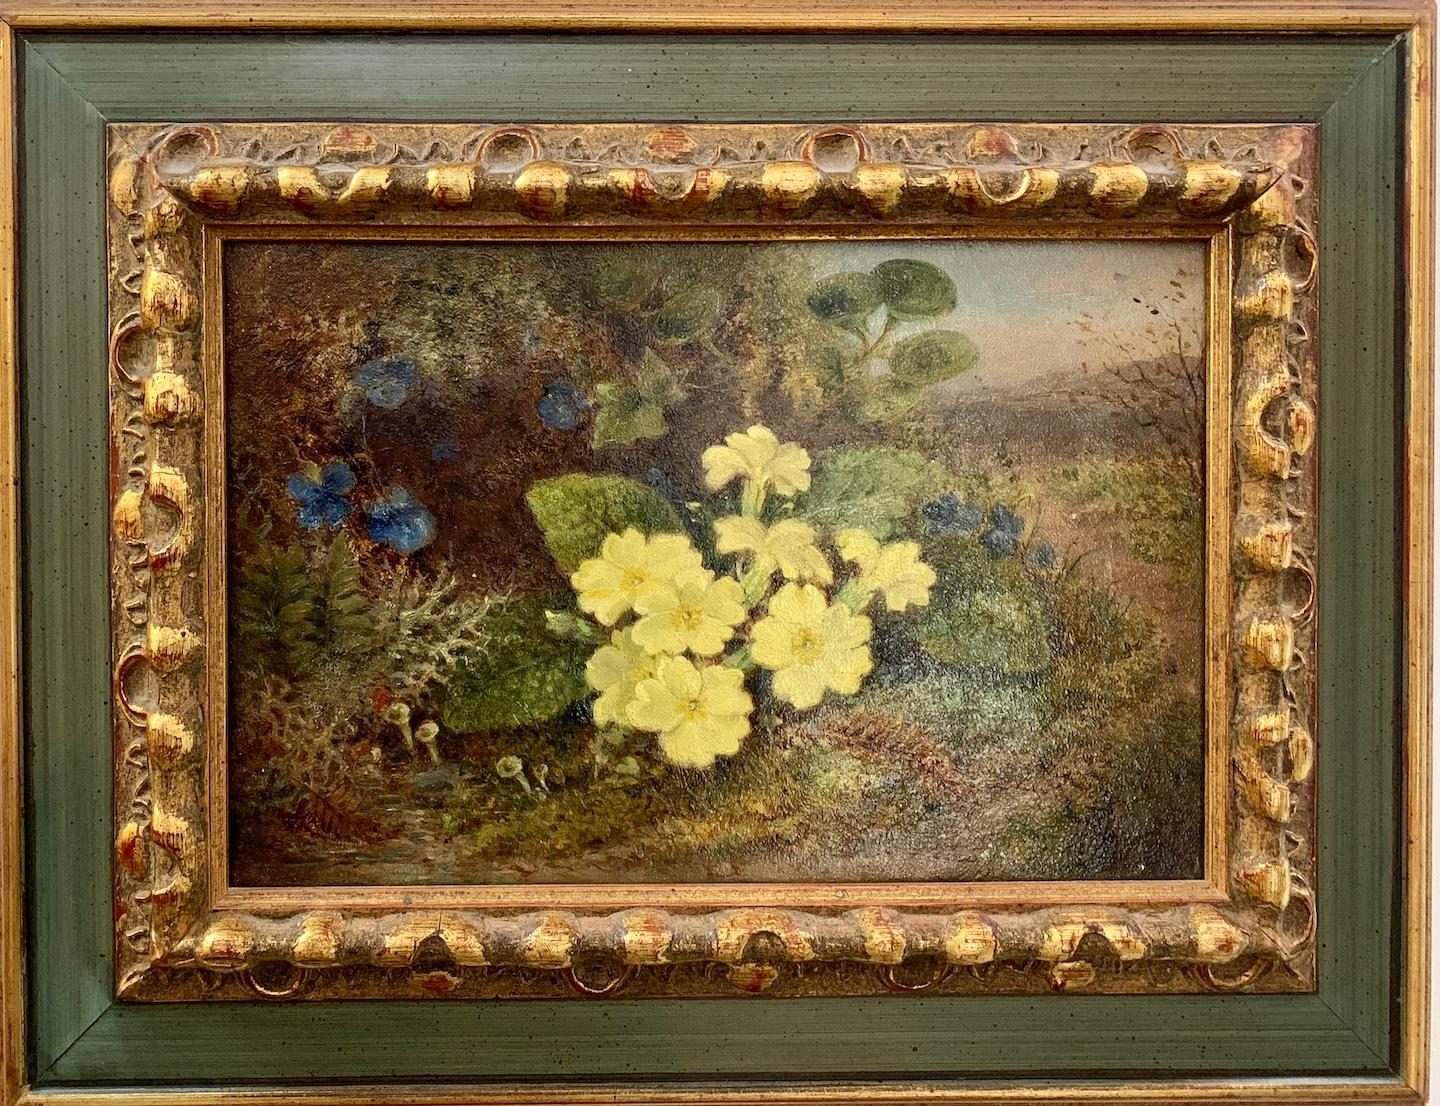 S.A Bridges Landscape Painting - 19th century English Victorian still life of yellow Violets in a landscape